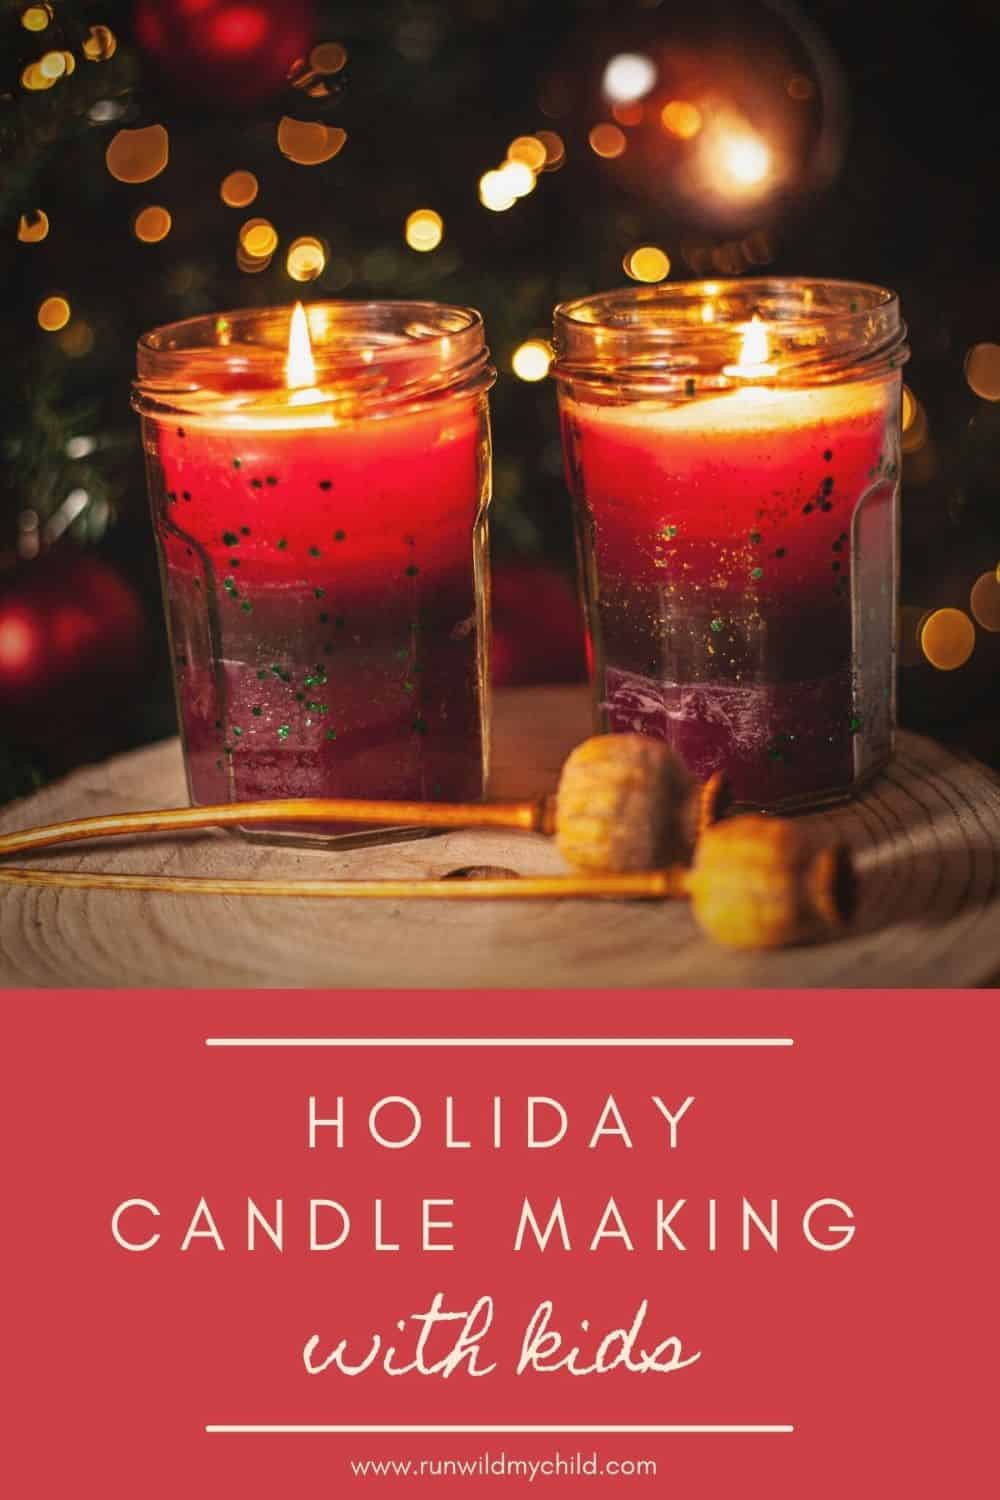 Holiday Candle Making with Kids • RUN WILD MY CHILD